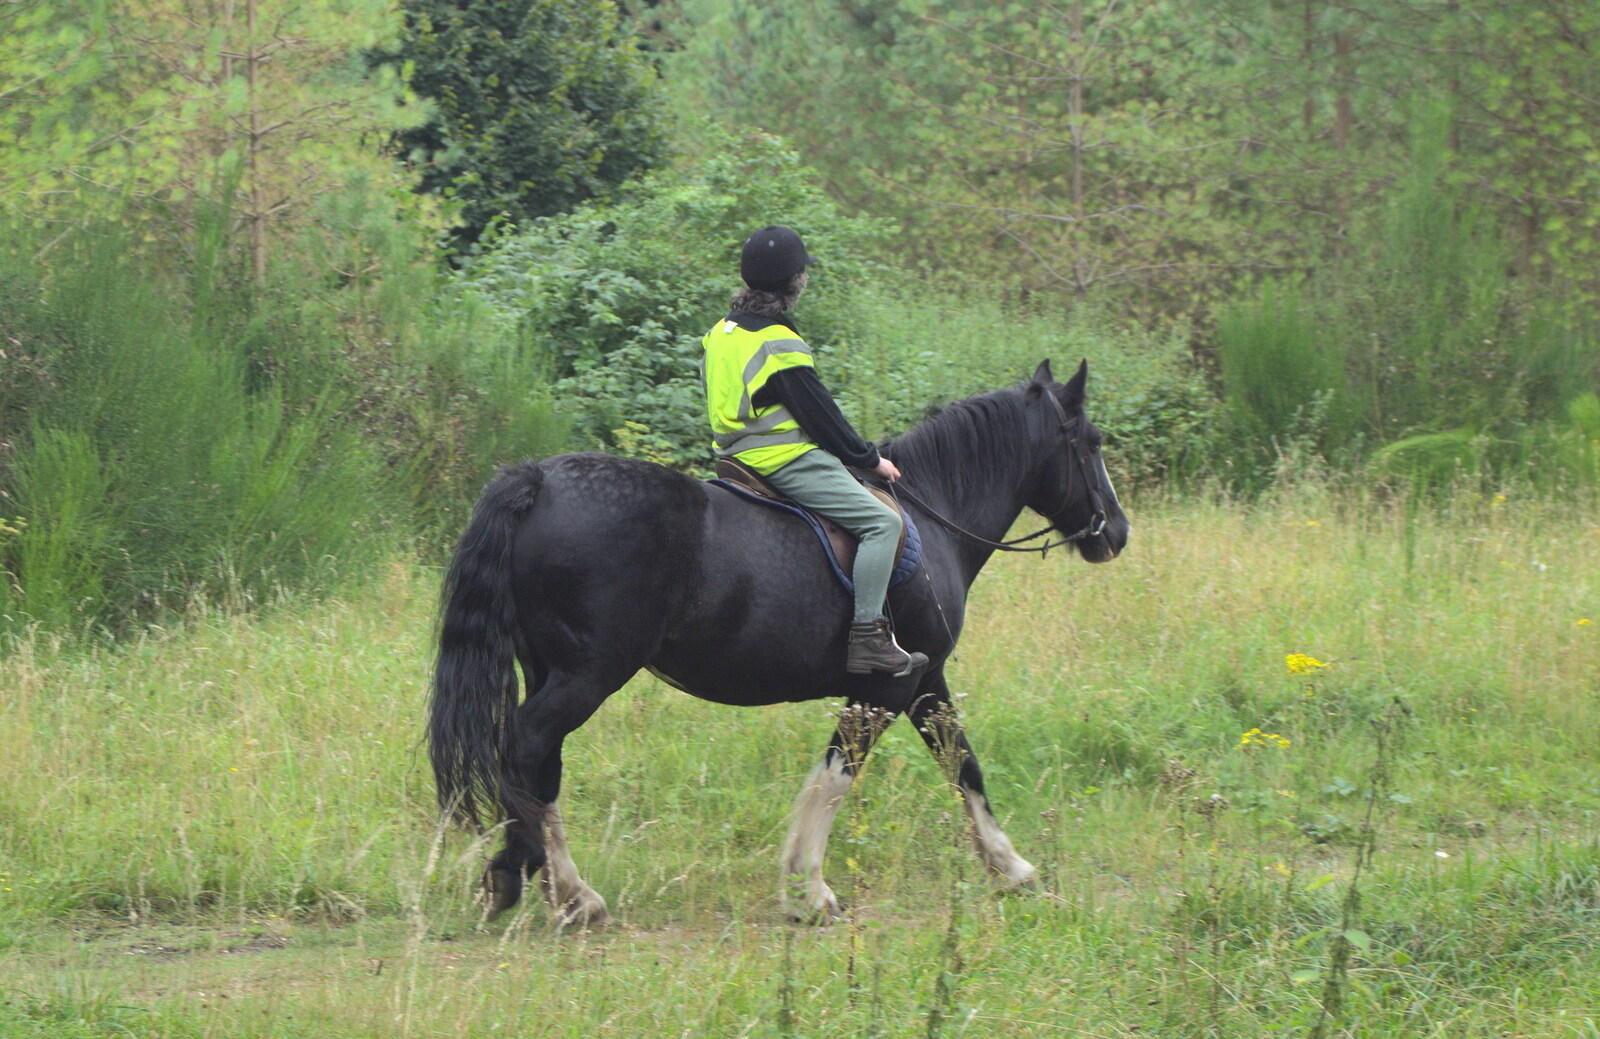 A horse and rider pass by from Camping at Dower House, West Harling, Norfolk - 1st September 2012